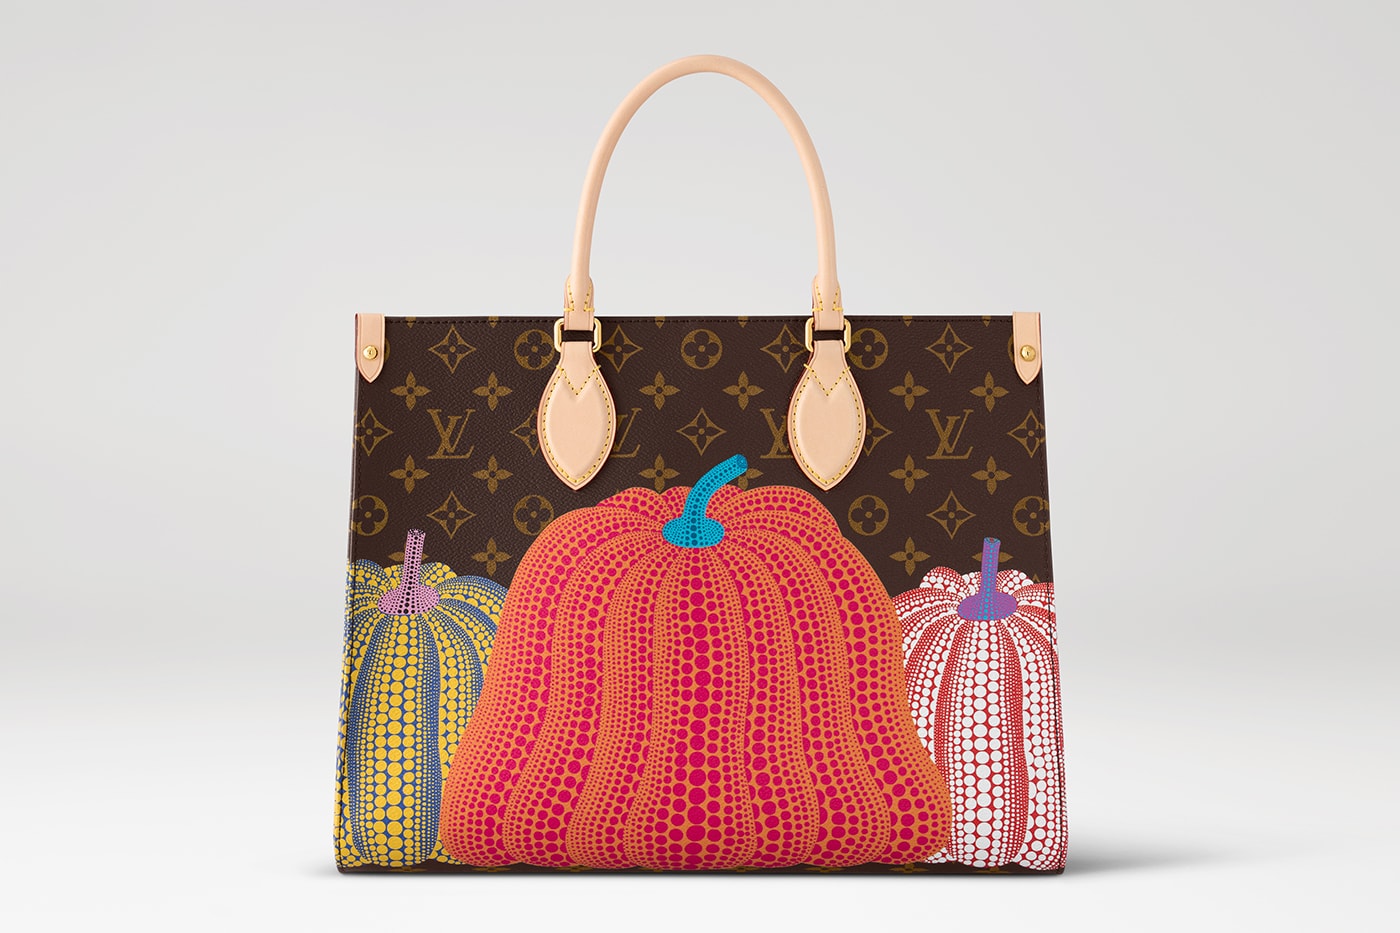 A New Louis Vuitton Collaboration Lets You Carry Your Favorite